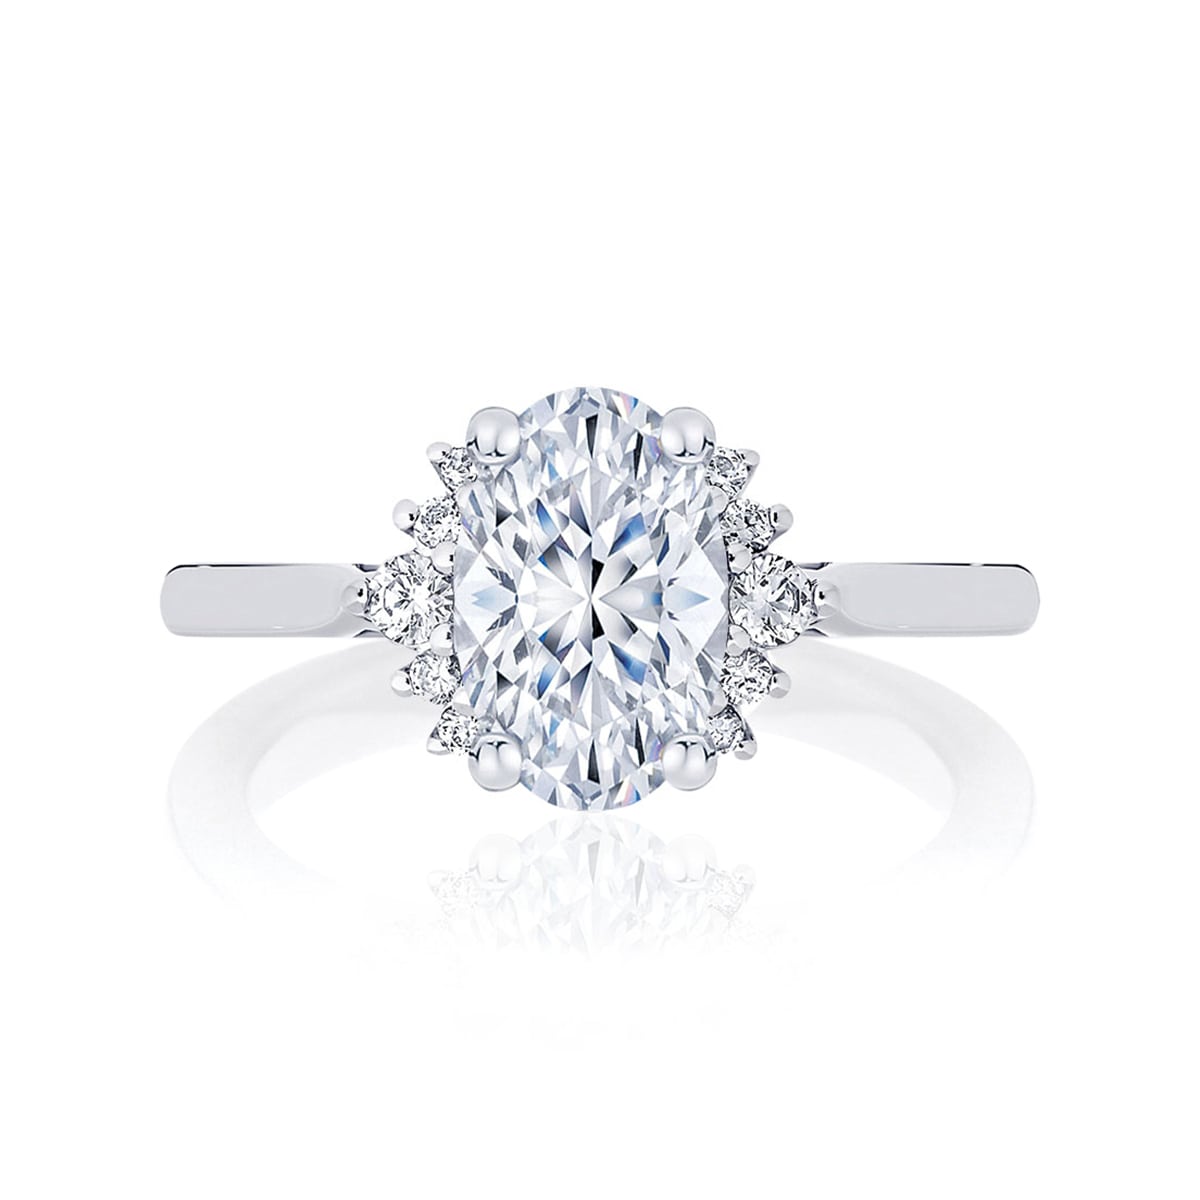 Oval Diamond with Side Stones Ring in Platinum | Nouvelle Lune (Diamond)